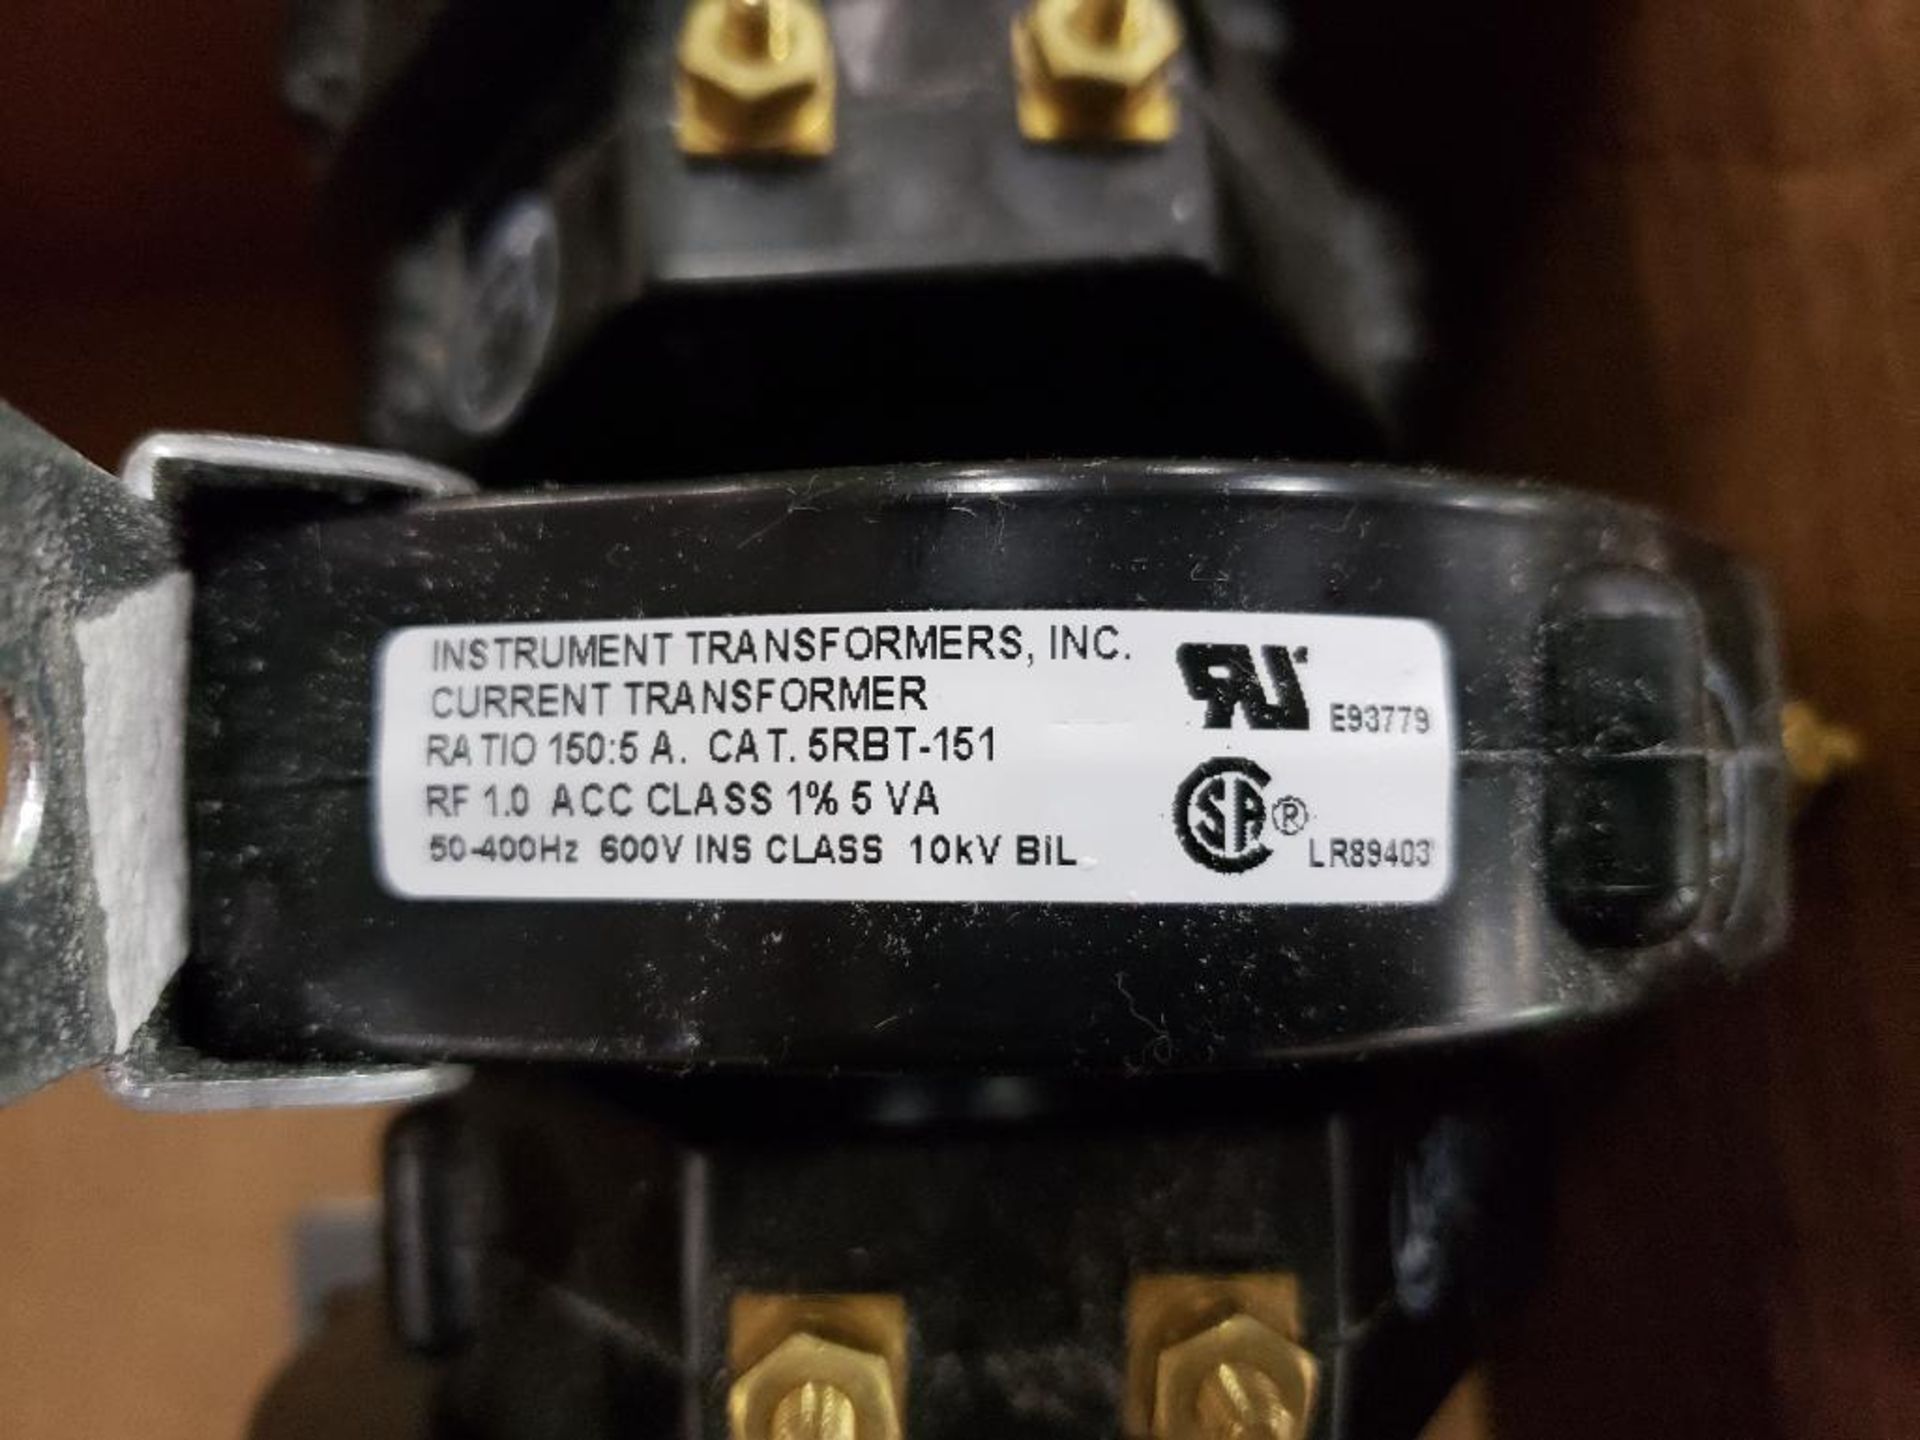 Qty 10 - Instrument Transformers Inc Current Transformer. Catalog 5RBT-151. New as pictured. - Image 2 of 3